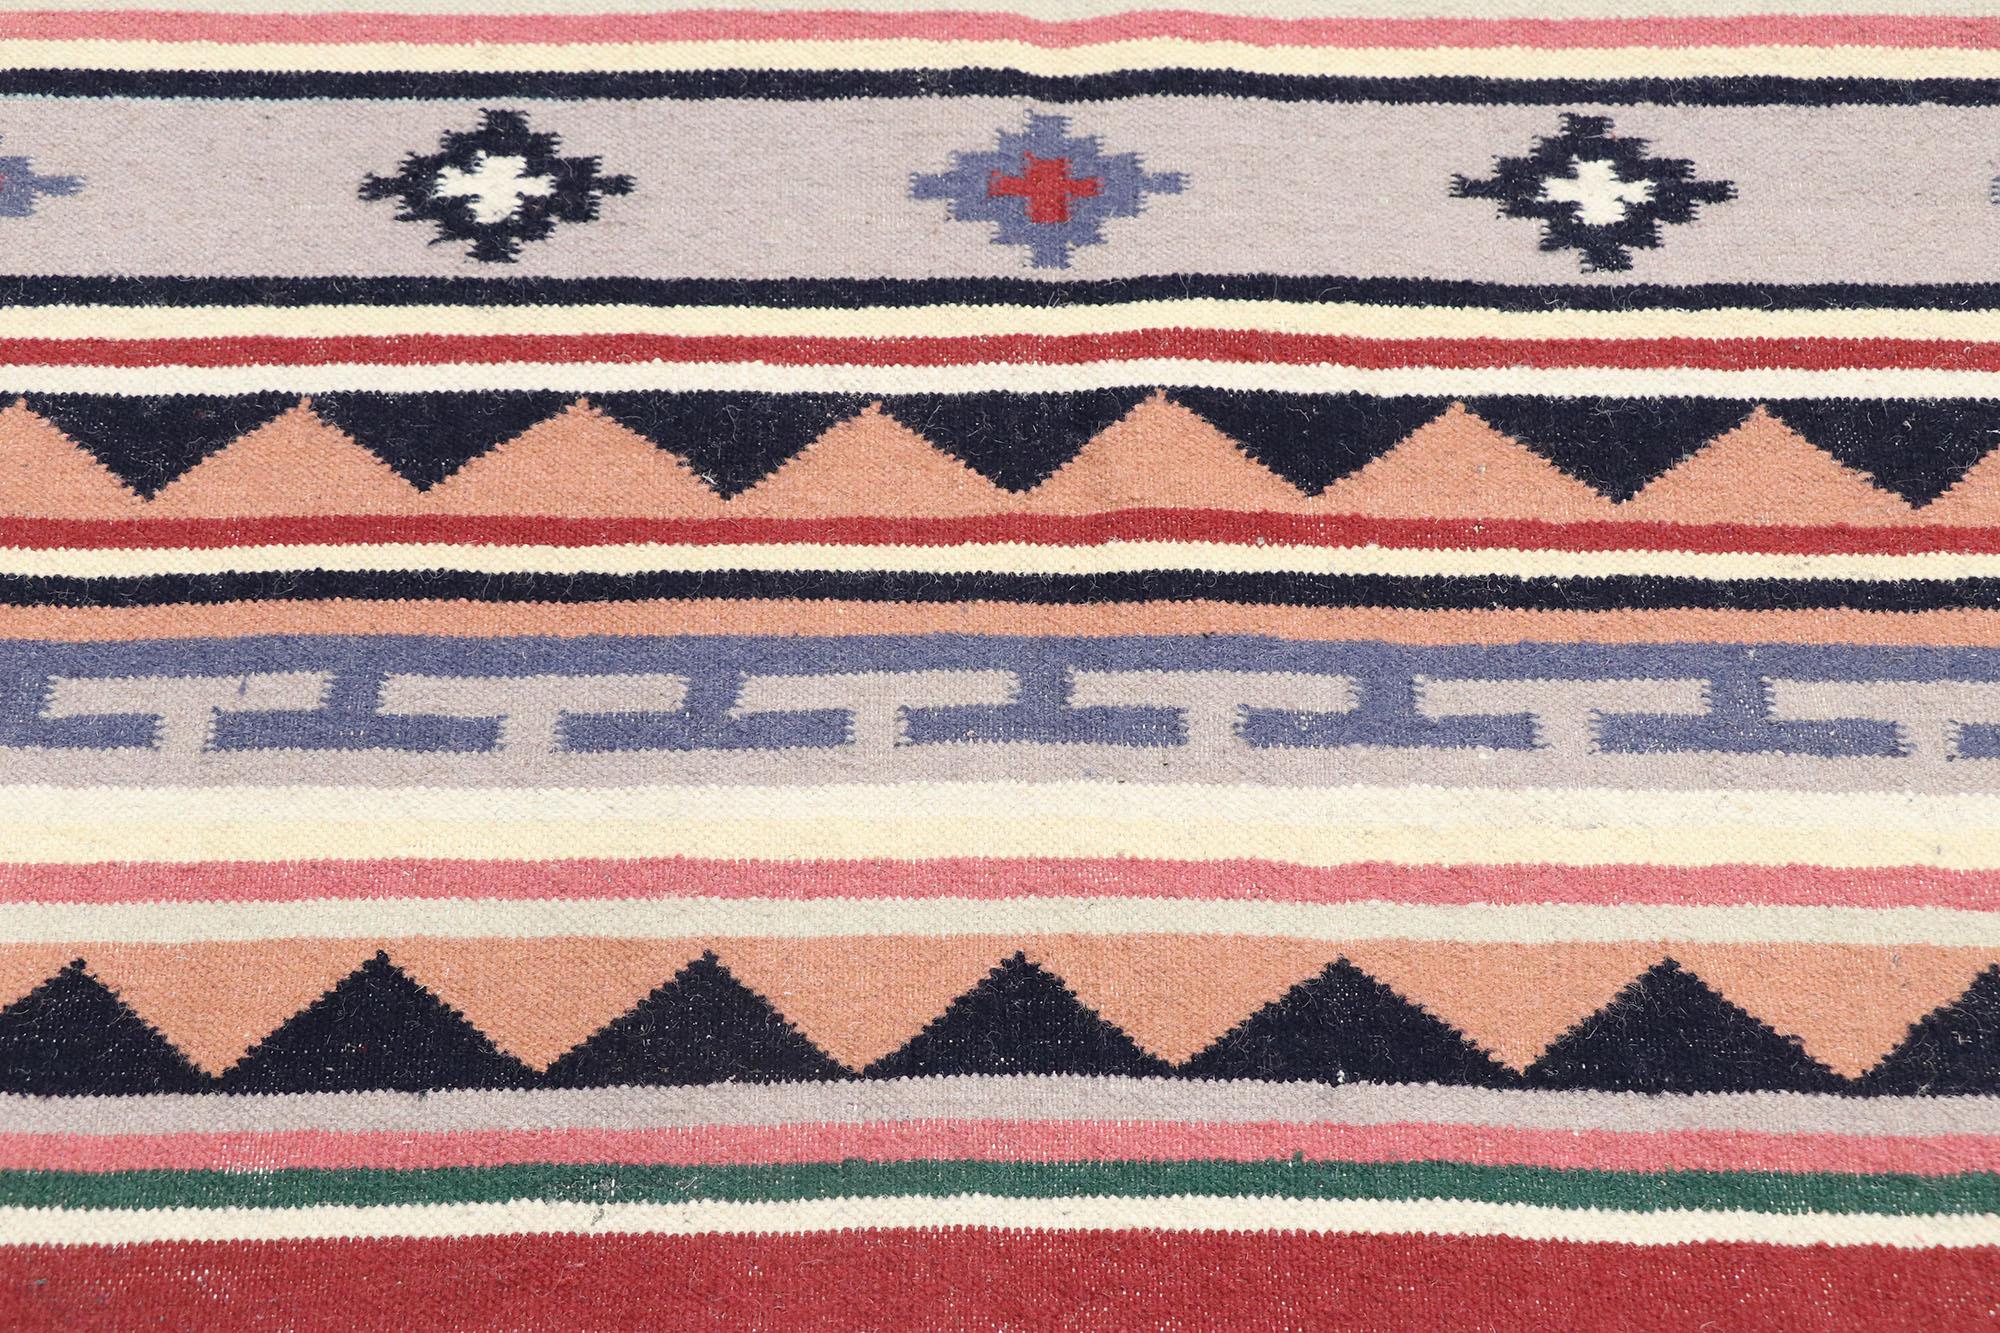 Vintage Persian Shiraz Kilim Rug with Boho Chic Tribal Style In Good Condition For Sale In Dallas, TX